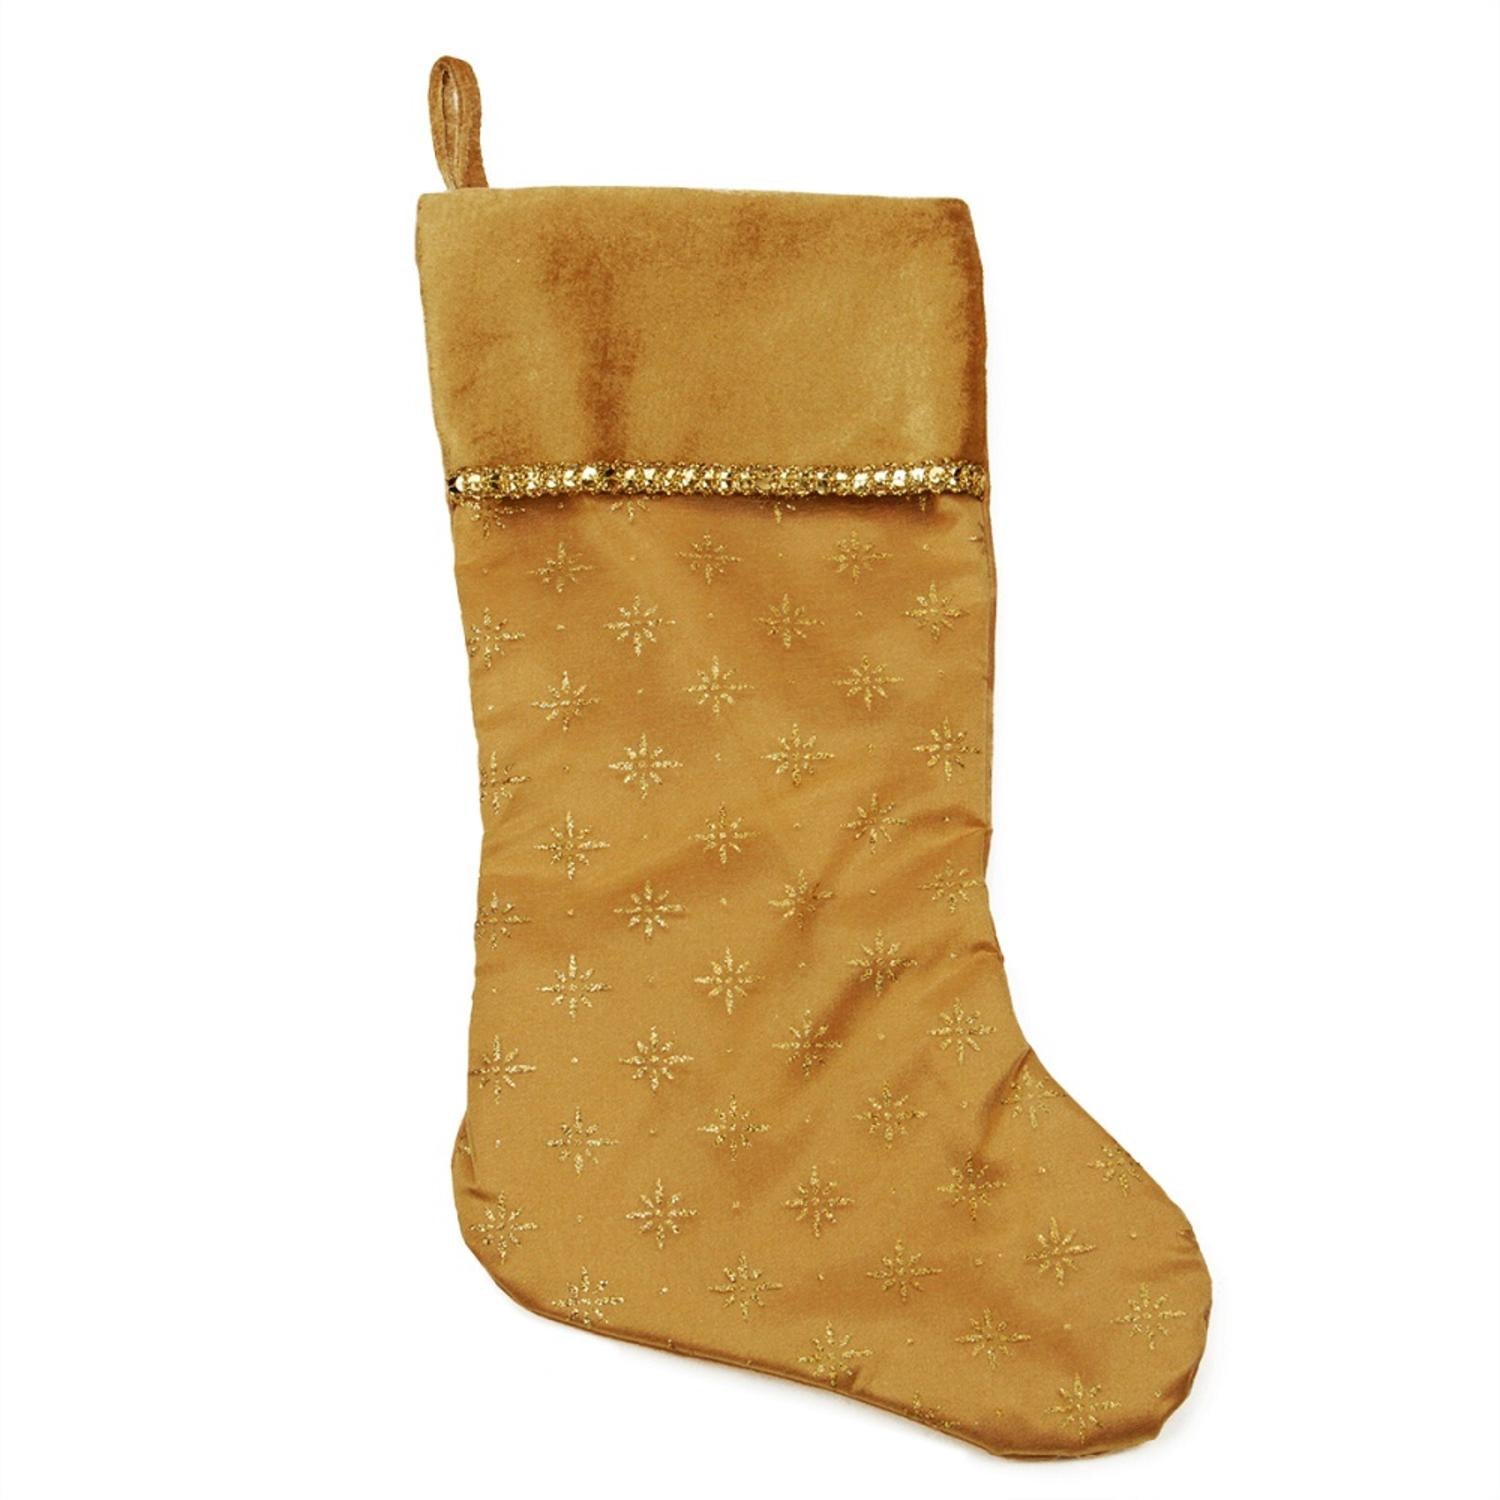 20" Gold Glittered Starburst Christmas Stocking with Shadow Velveteen Cuff